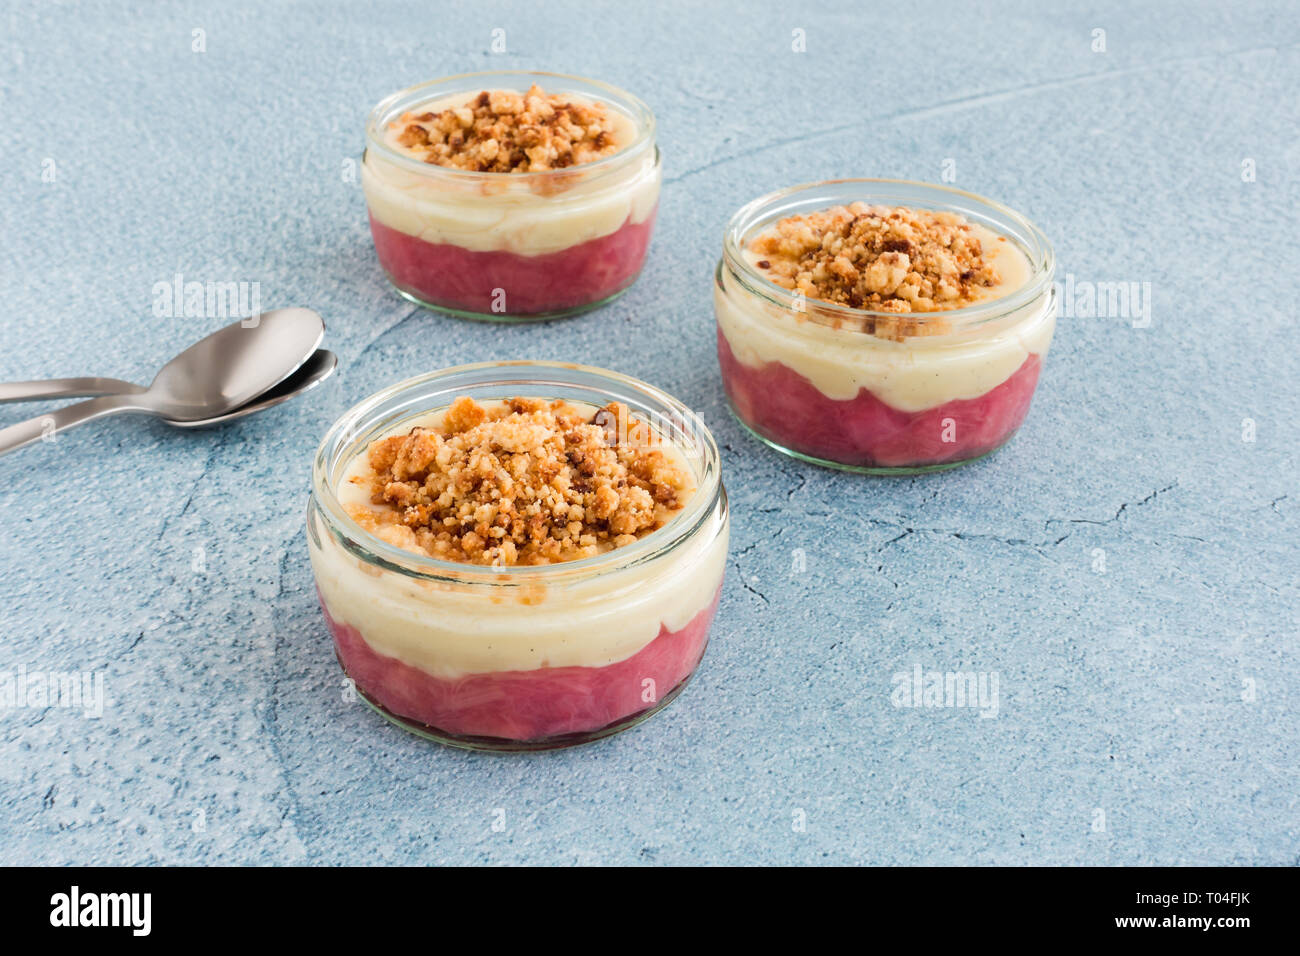 Closeup of homemade rhubarb and madagascan vanilla custard dessert with crumbs in glass regards on blue cement background with copy space. Stock Photo